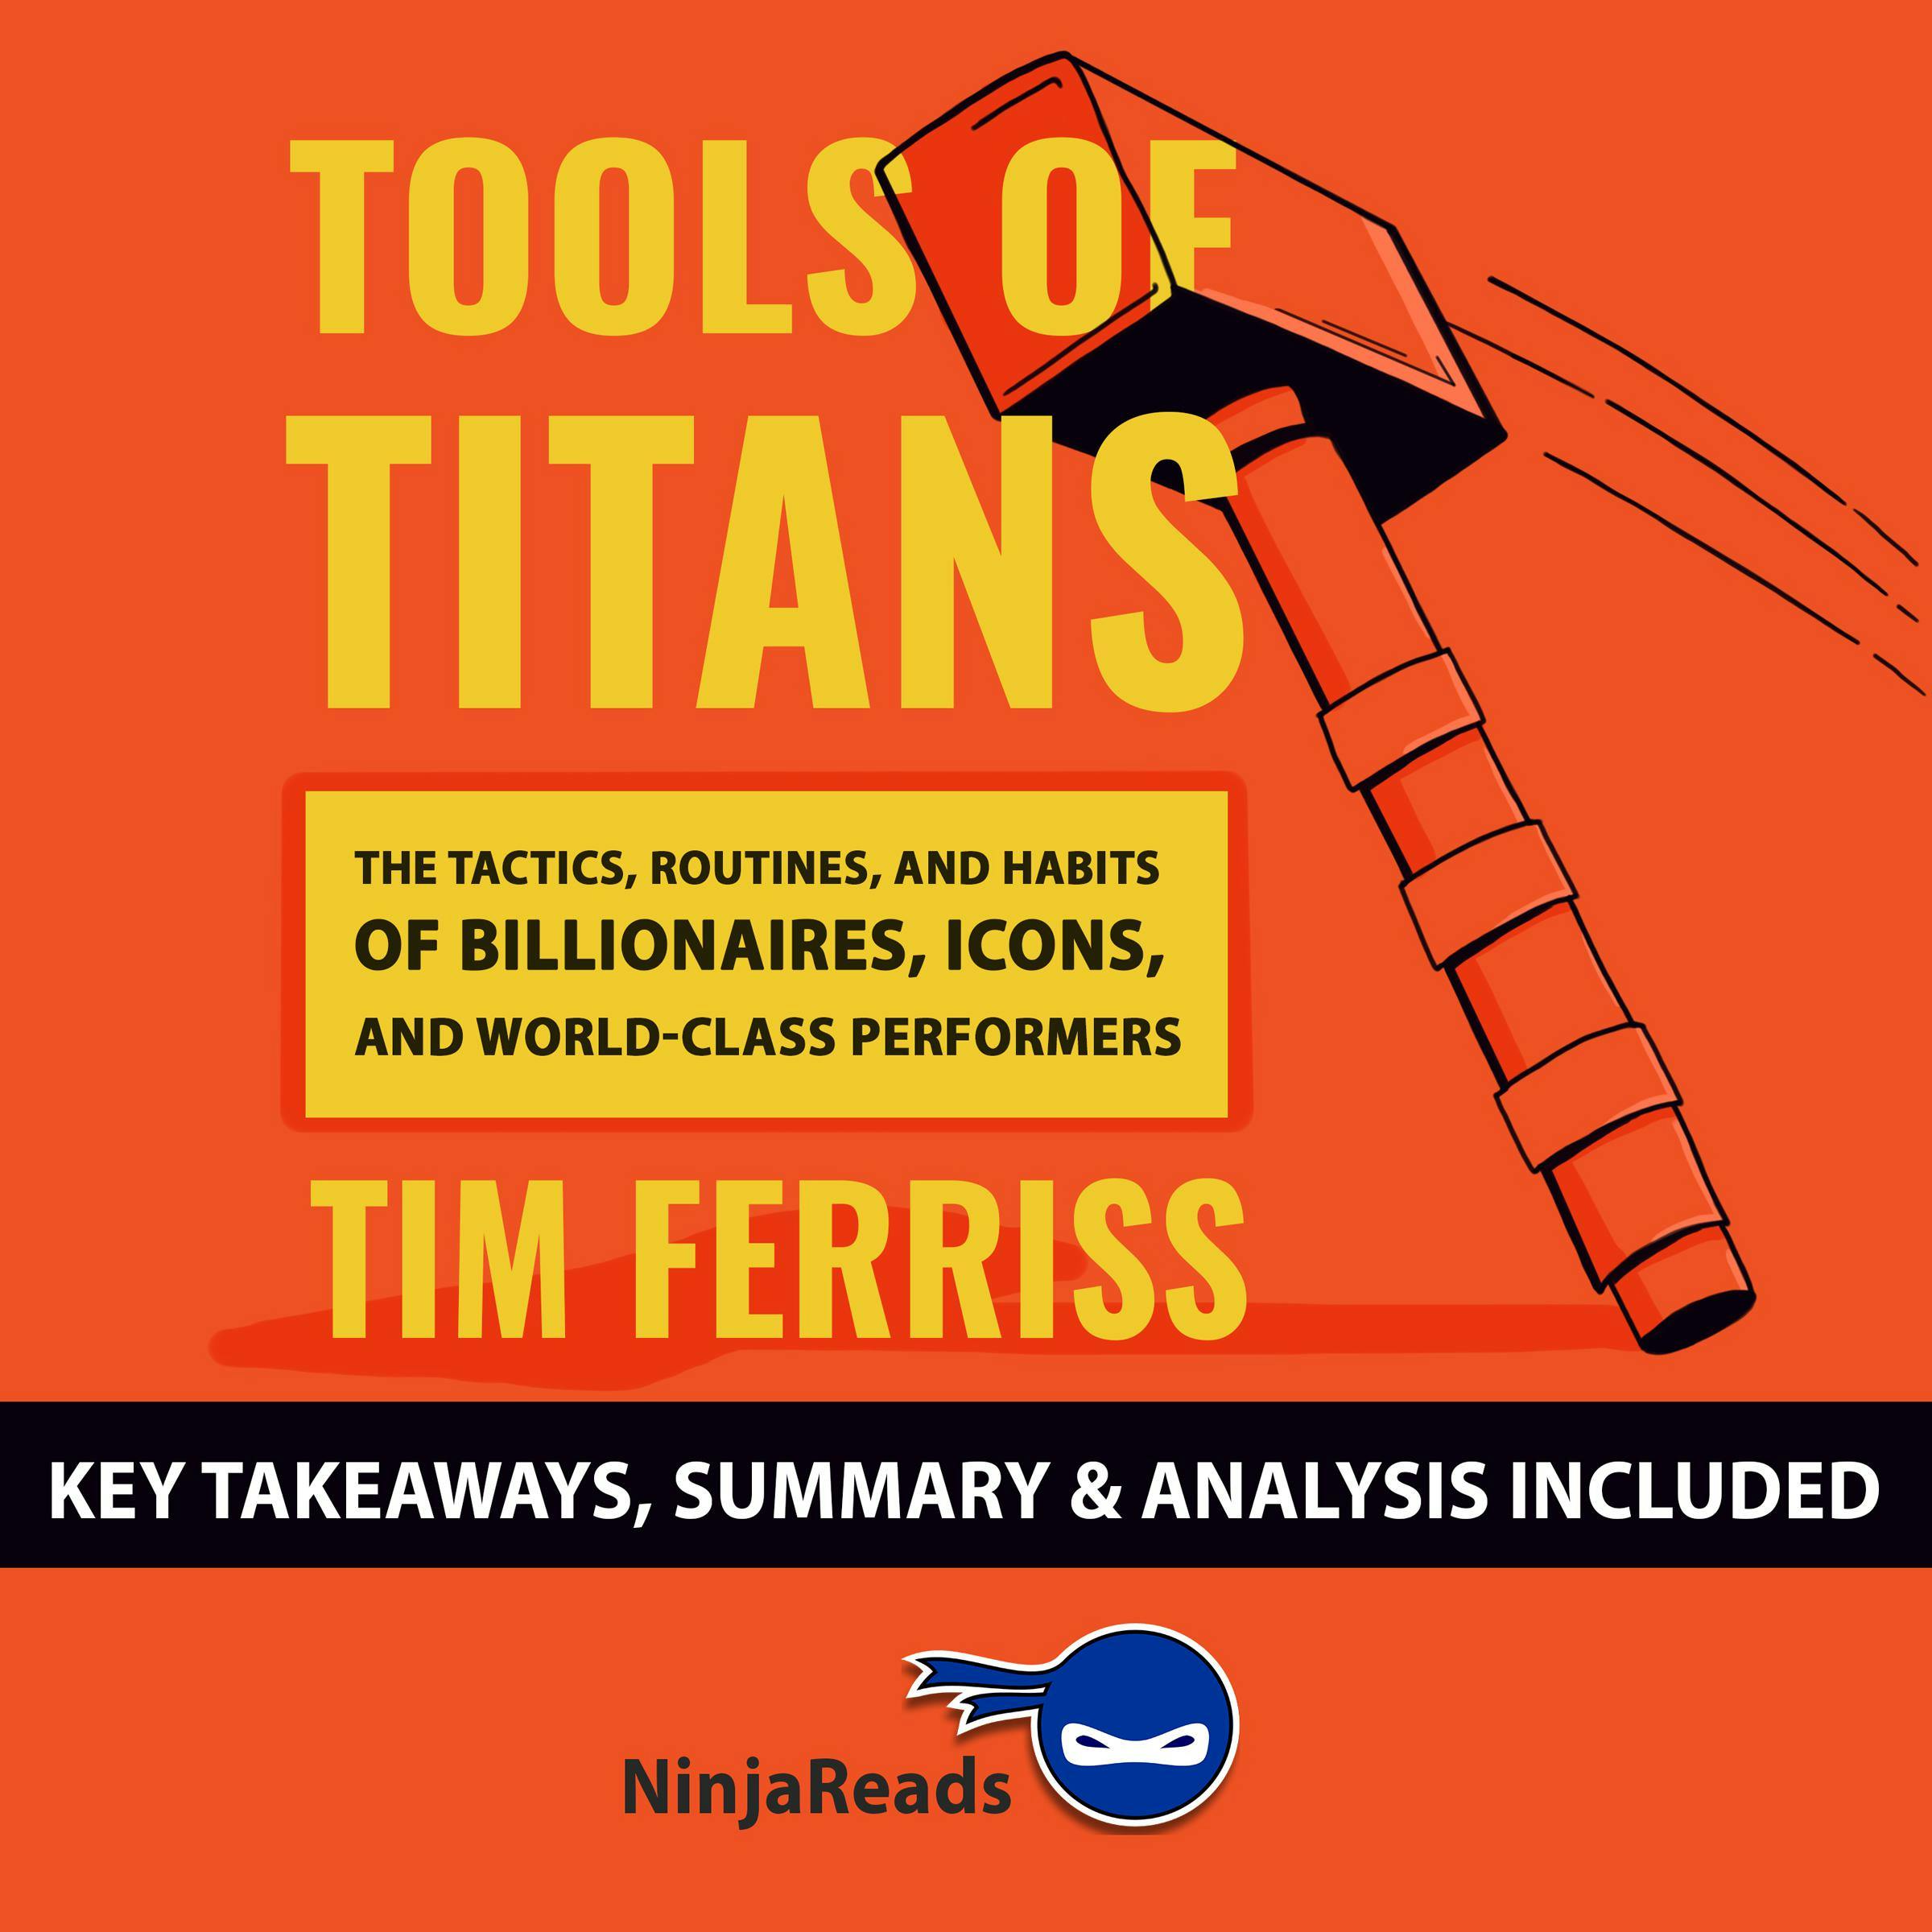 Summary: Tools of Titans: The Tactics, Routines, and Habits of Billionaires, Icons, and World-Class Performers by Tim Ferriss: Key Takeaways, Summary & Analysis Included - undefined